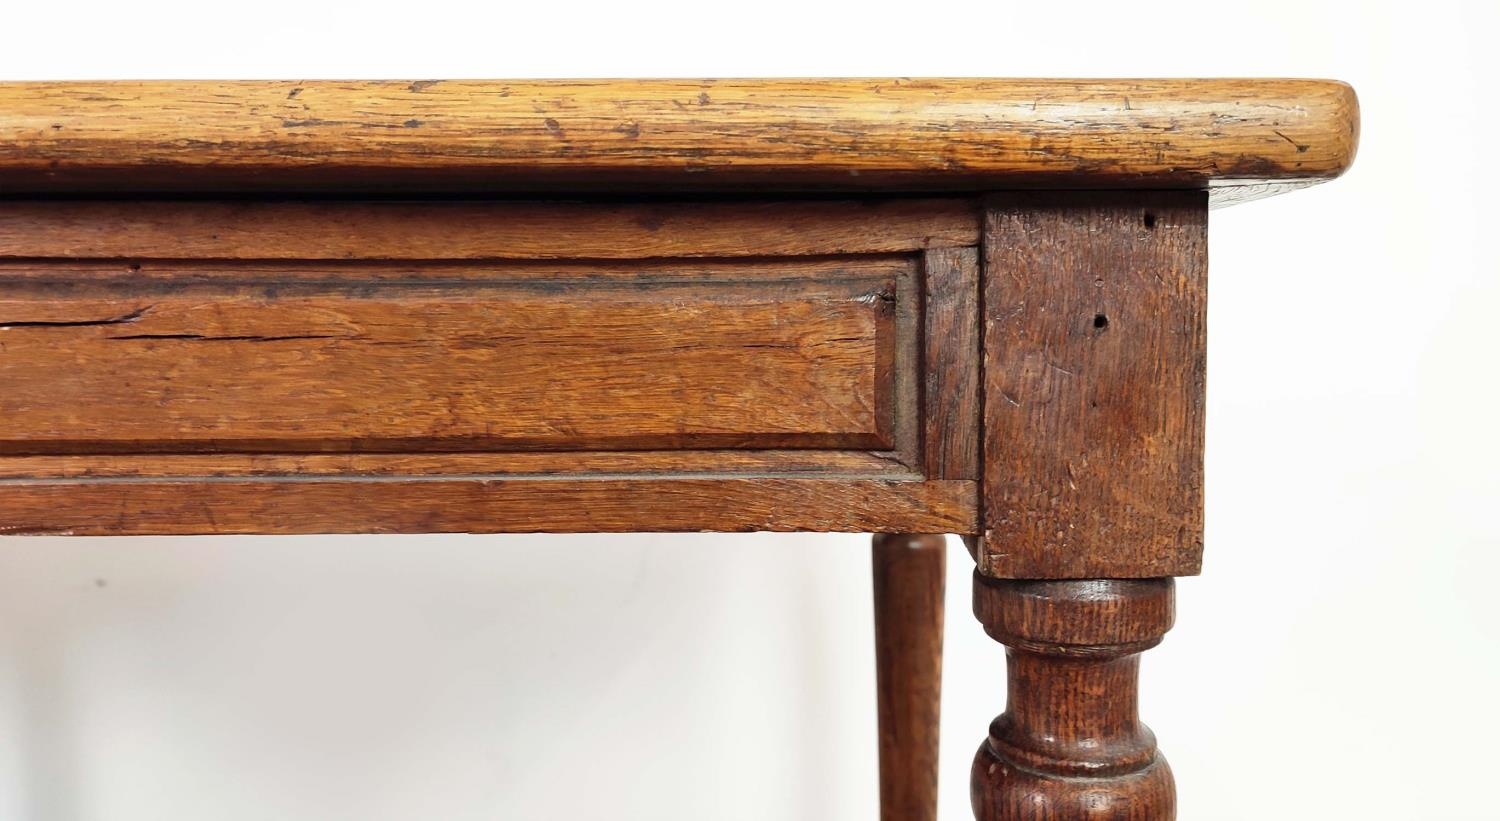 REFECTORY TABLE, late 19th century French oak with pot board, 79cm H x 199cm x 64cm. - Image 6 of 12